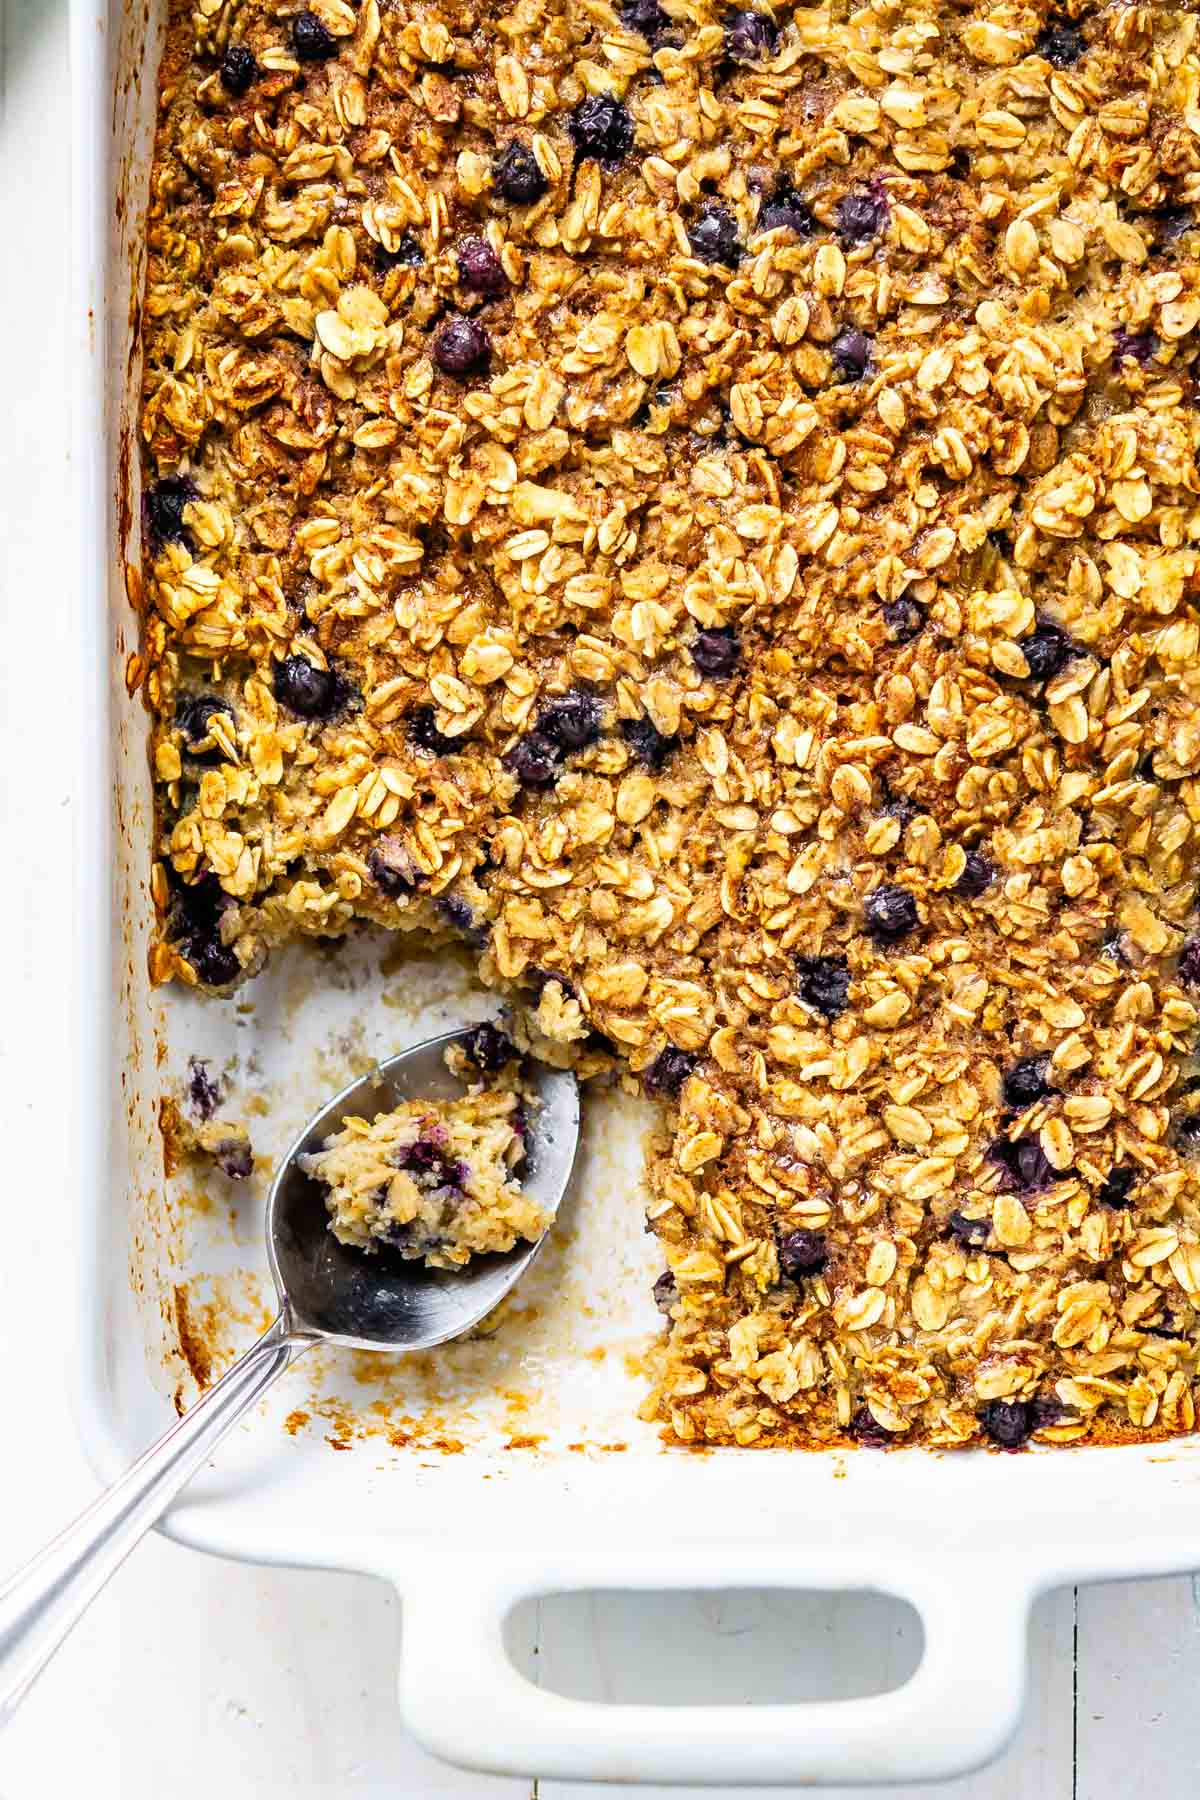 Blueberry Baked Oatmeal - Crazy for Crust